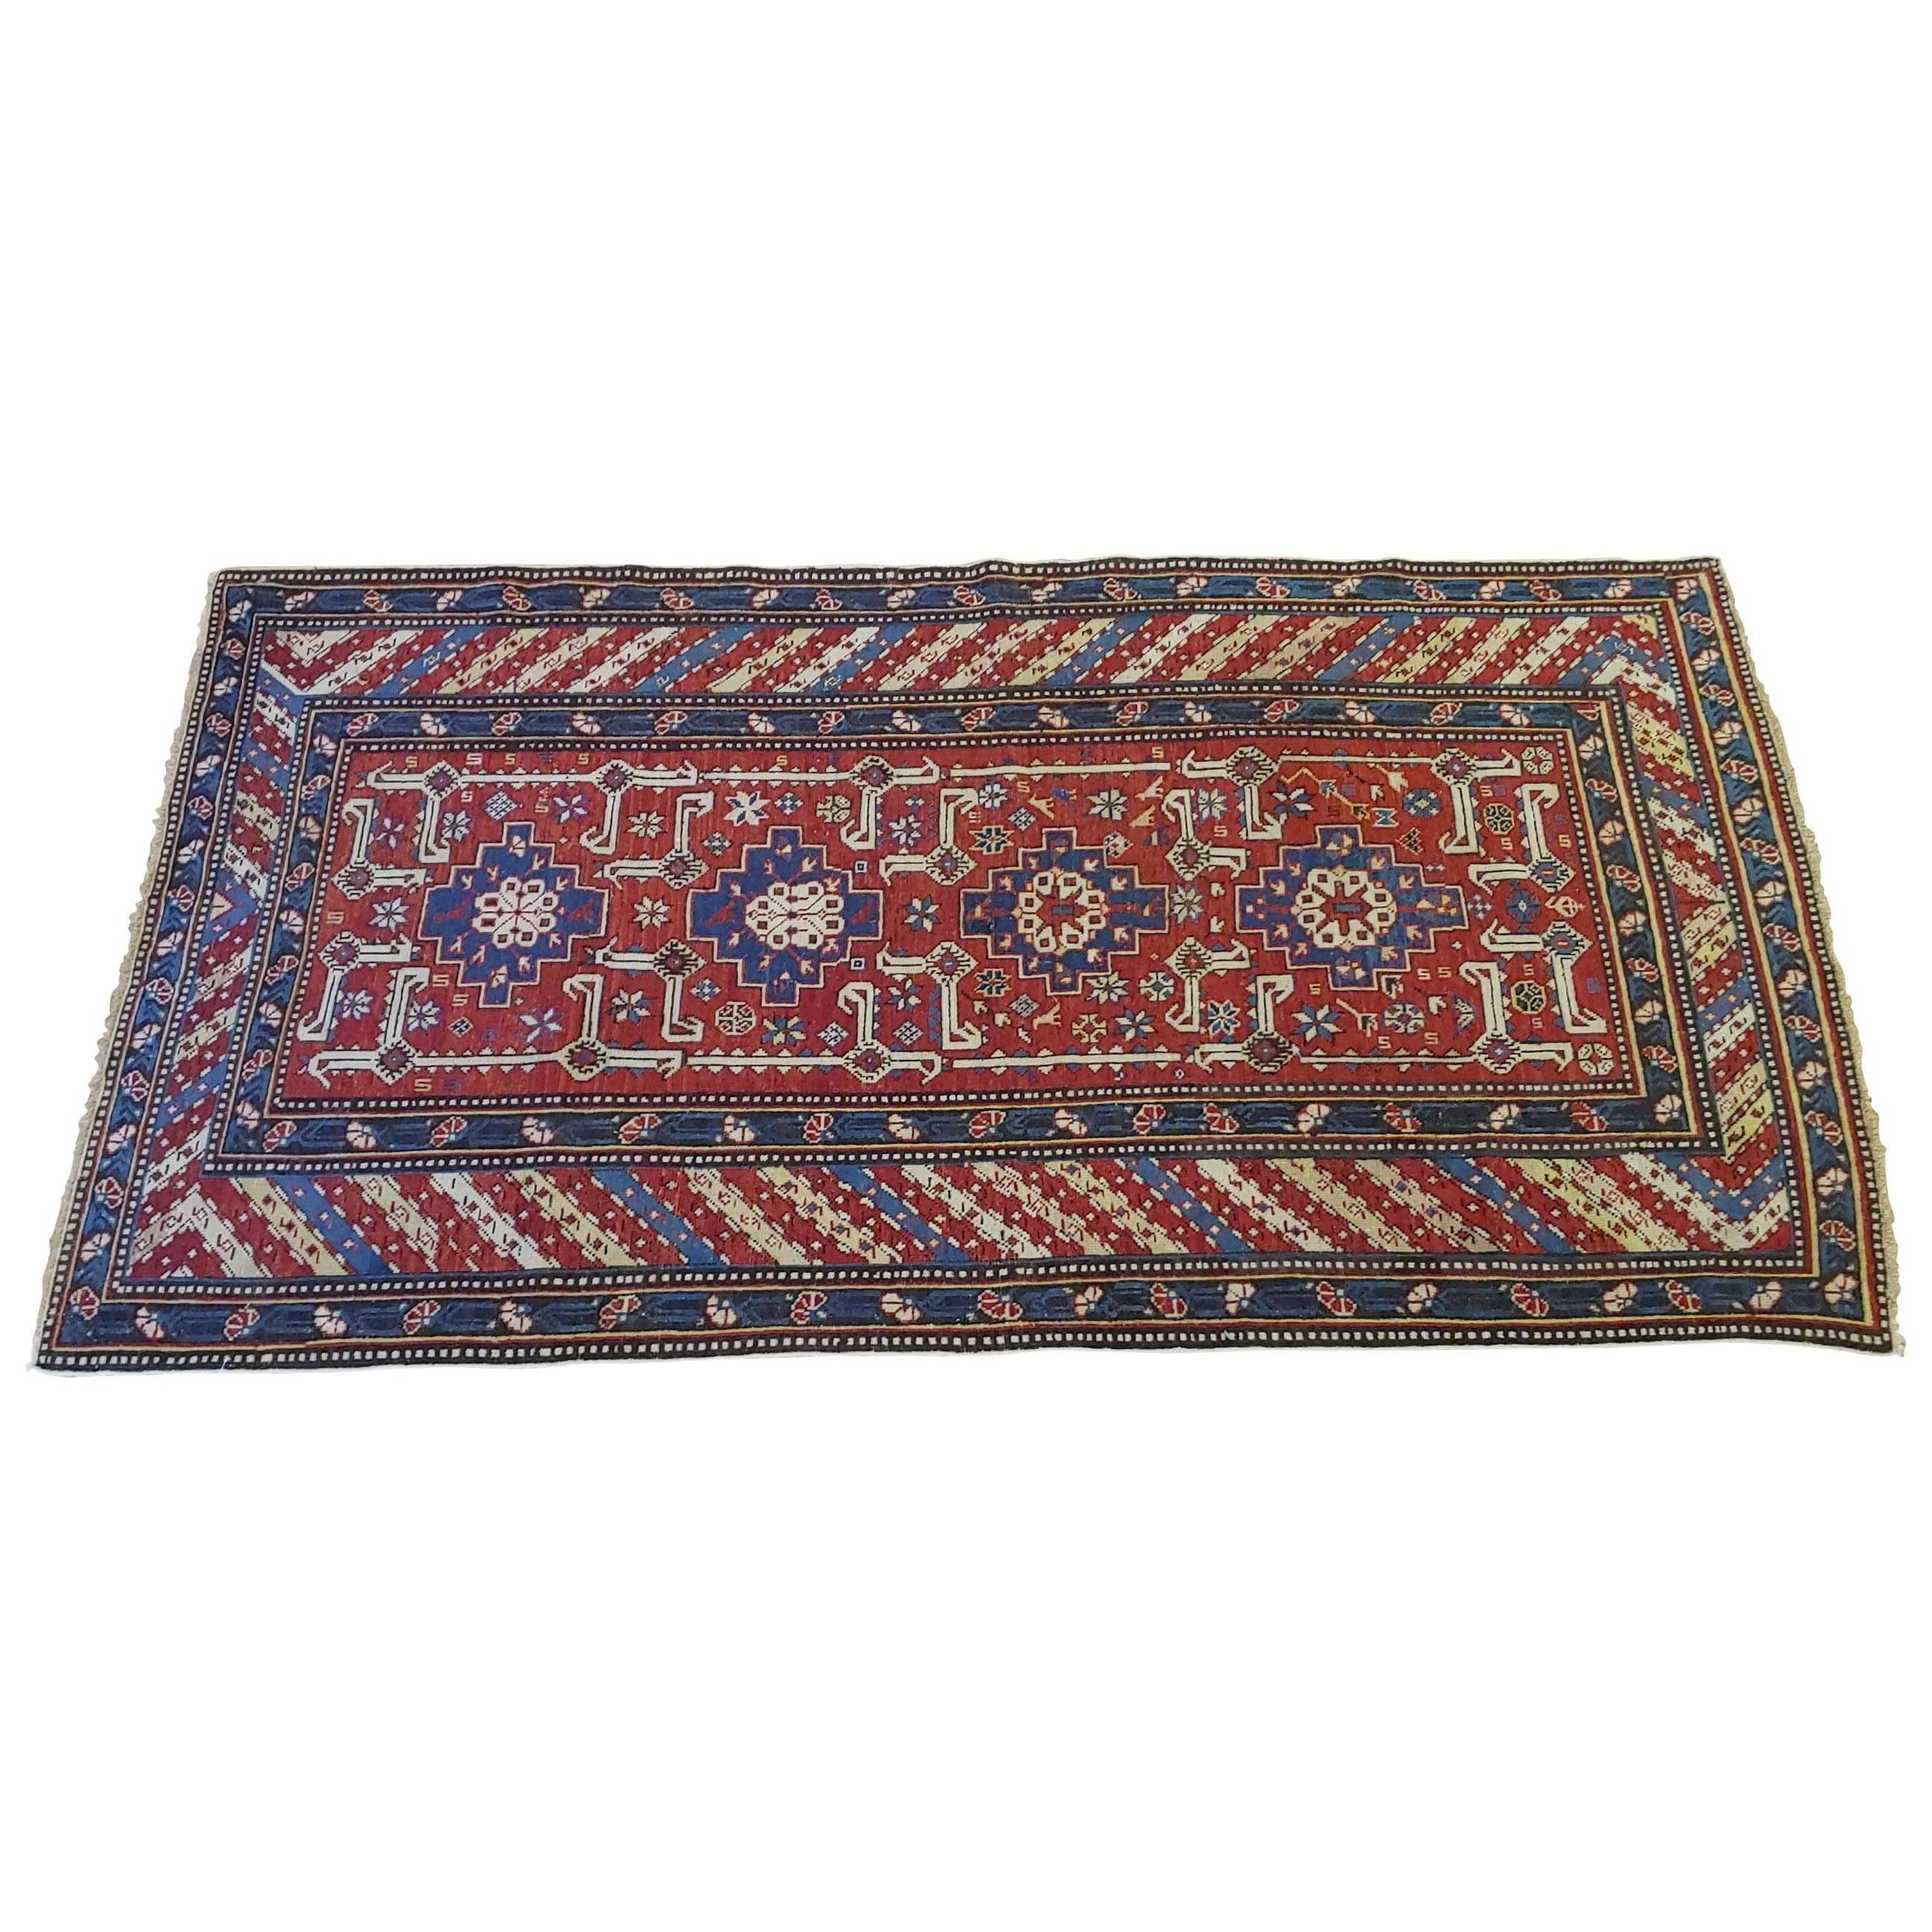 This is a Caucasian Shirvan rug with a lovely all-over geometric motif on a rust field with a striped border. It is circa 1900 and is a scatter size of 3-7 x 6-9.